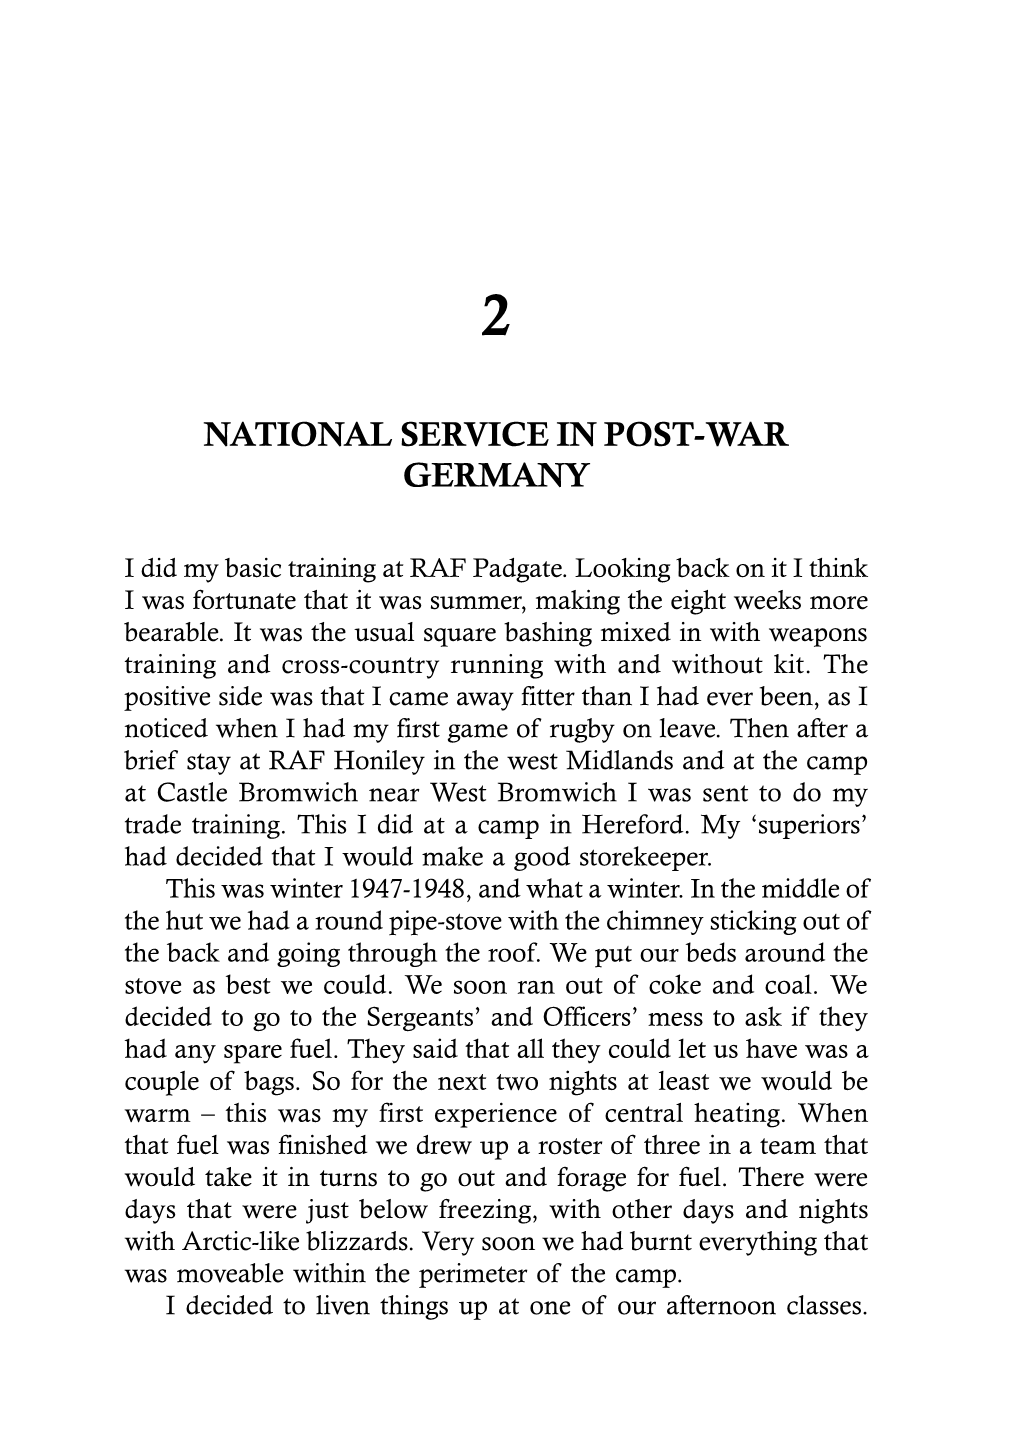 National Service in Post-War Germany